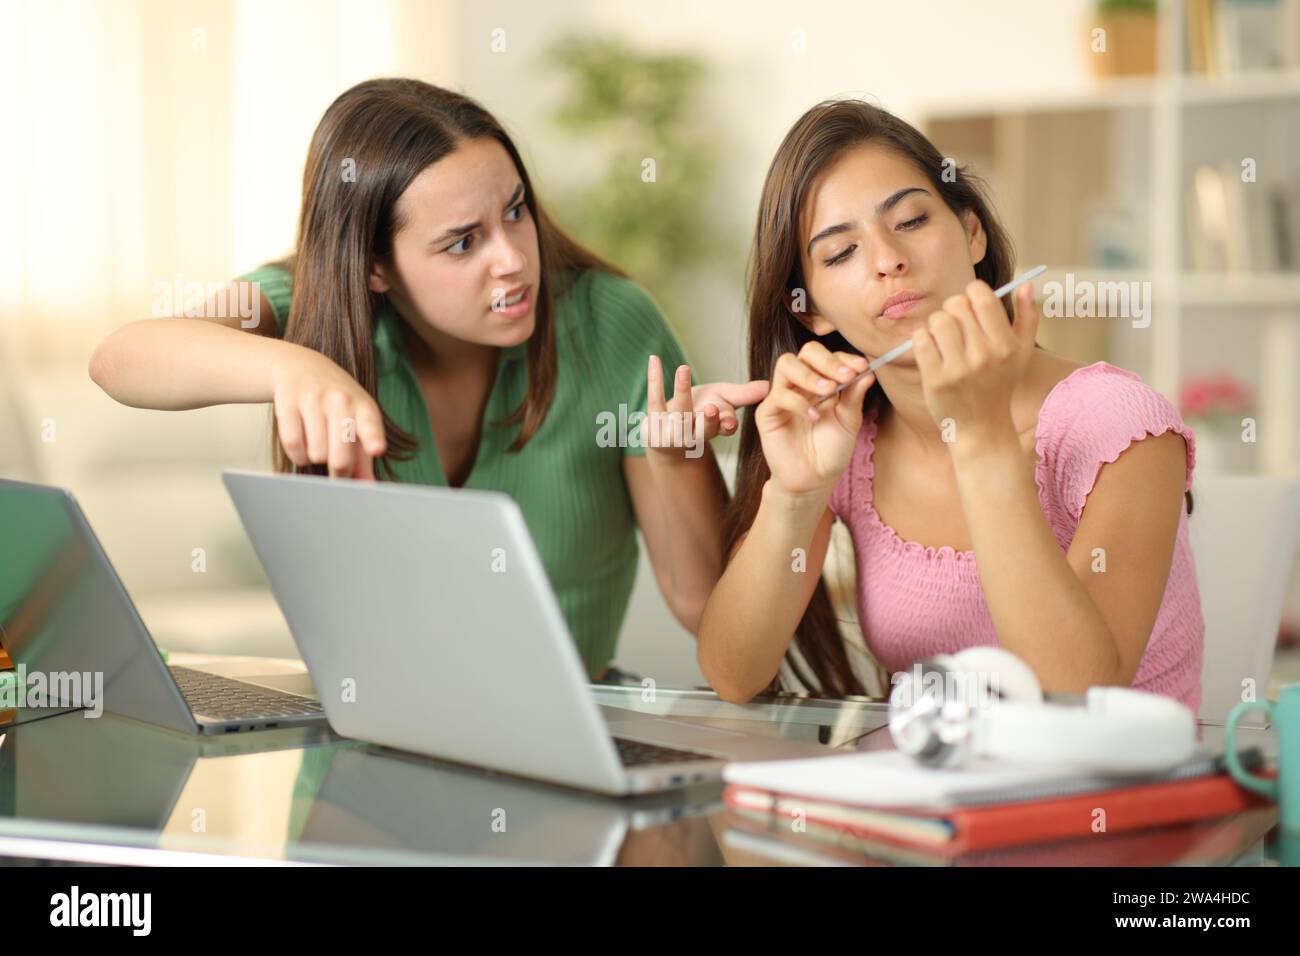 Angry student scolding to her lazy classmate who is wasting time at home Stock Photo